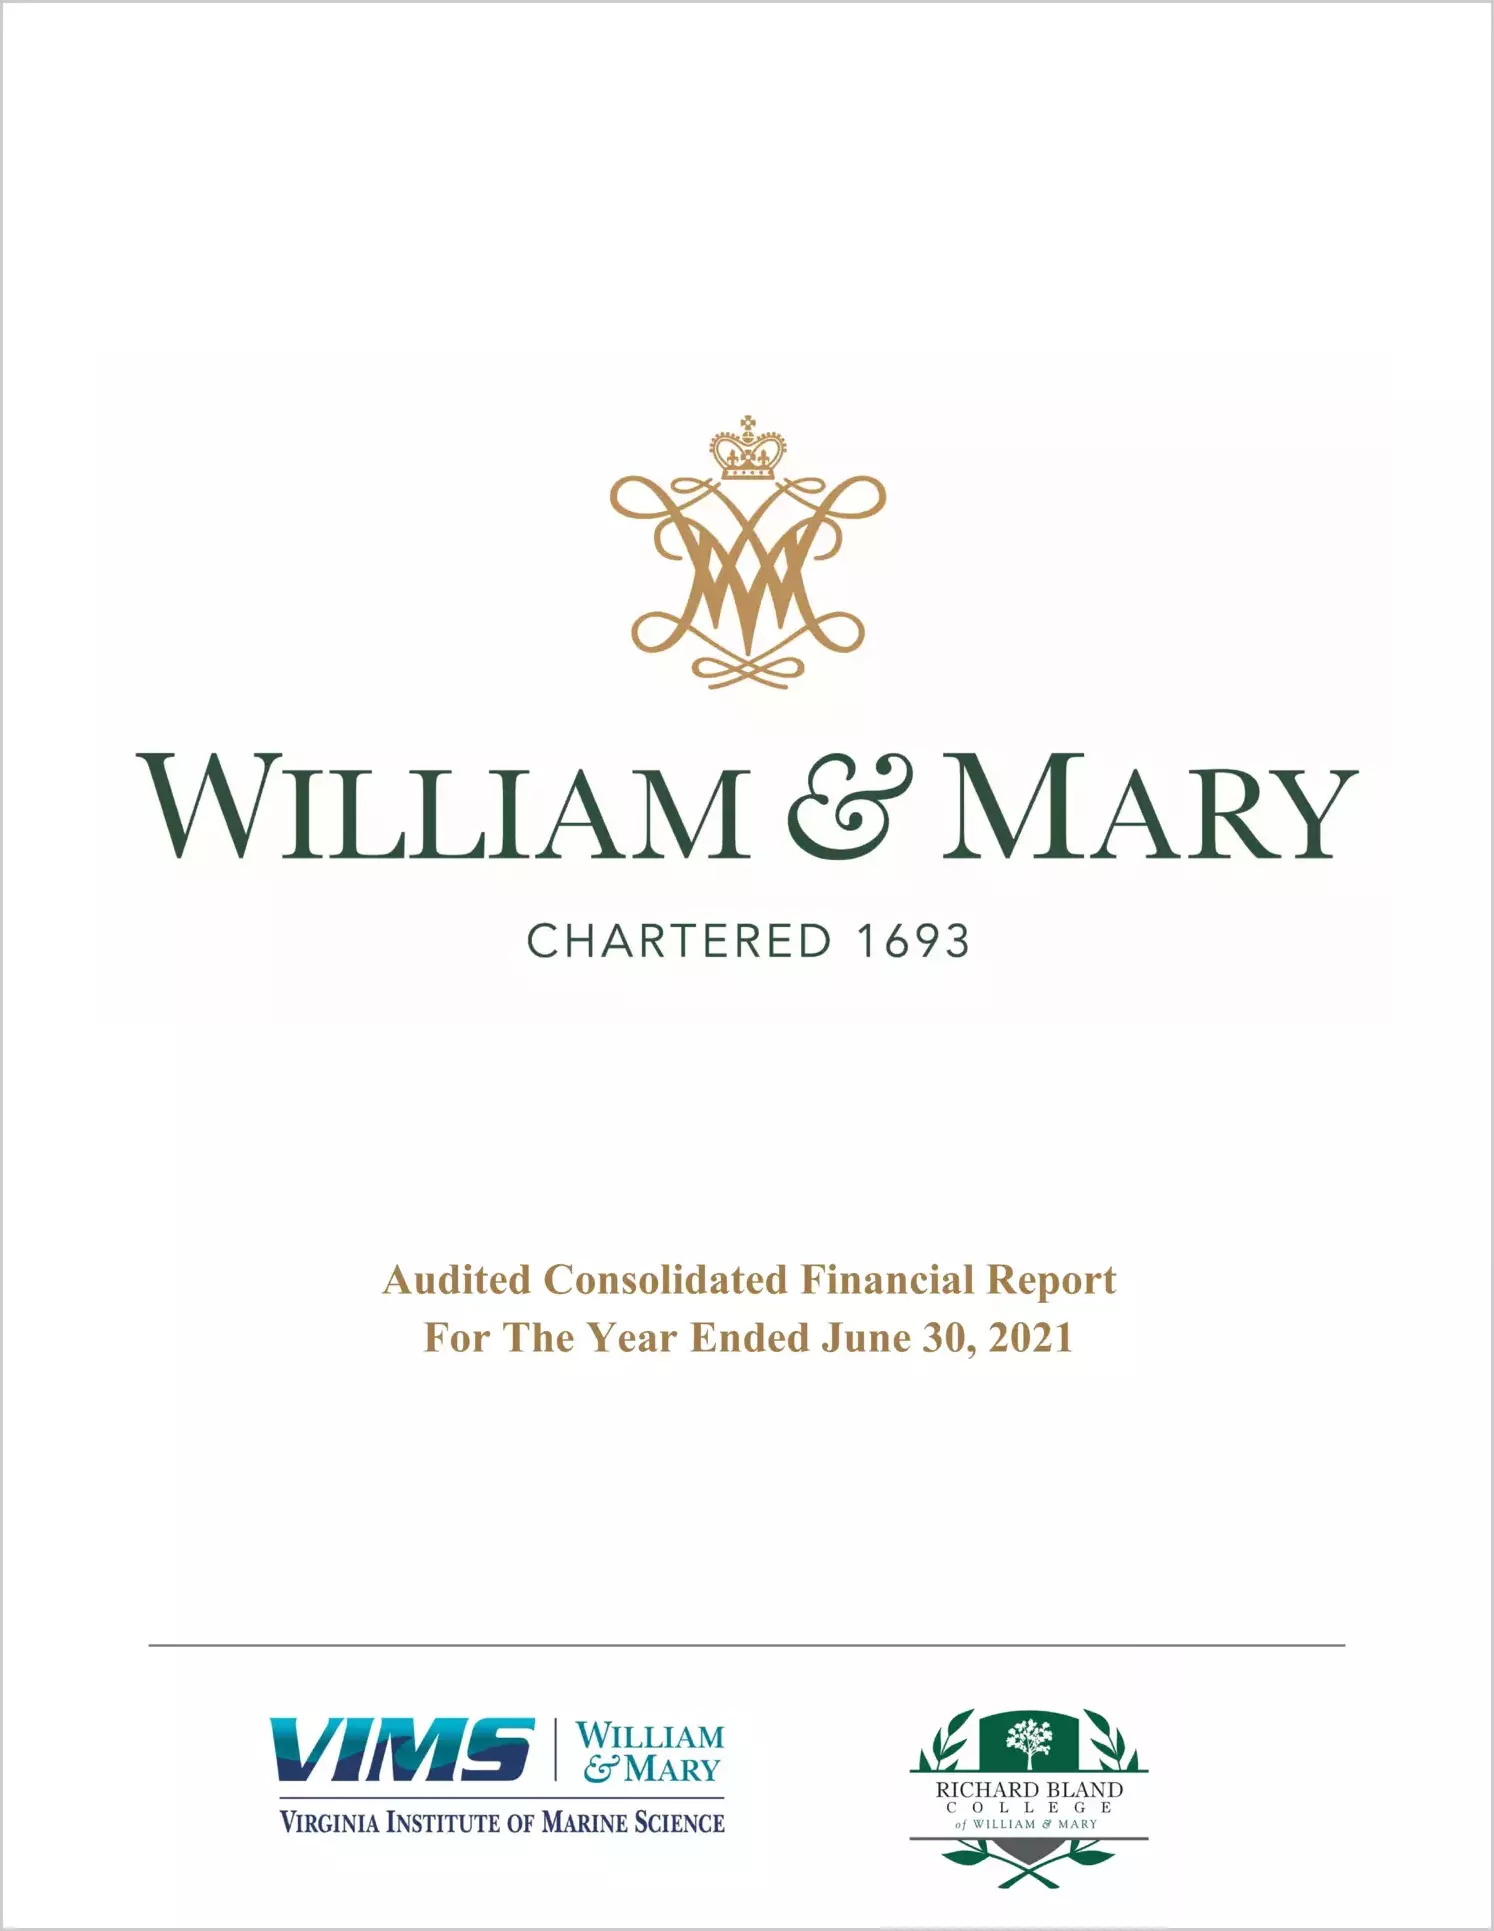 William & Mary, Virginia Institute of Marine Science, and Richard Bland College Financial Statements for the year ended June 30, 2021